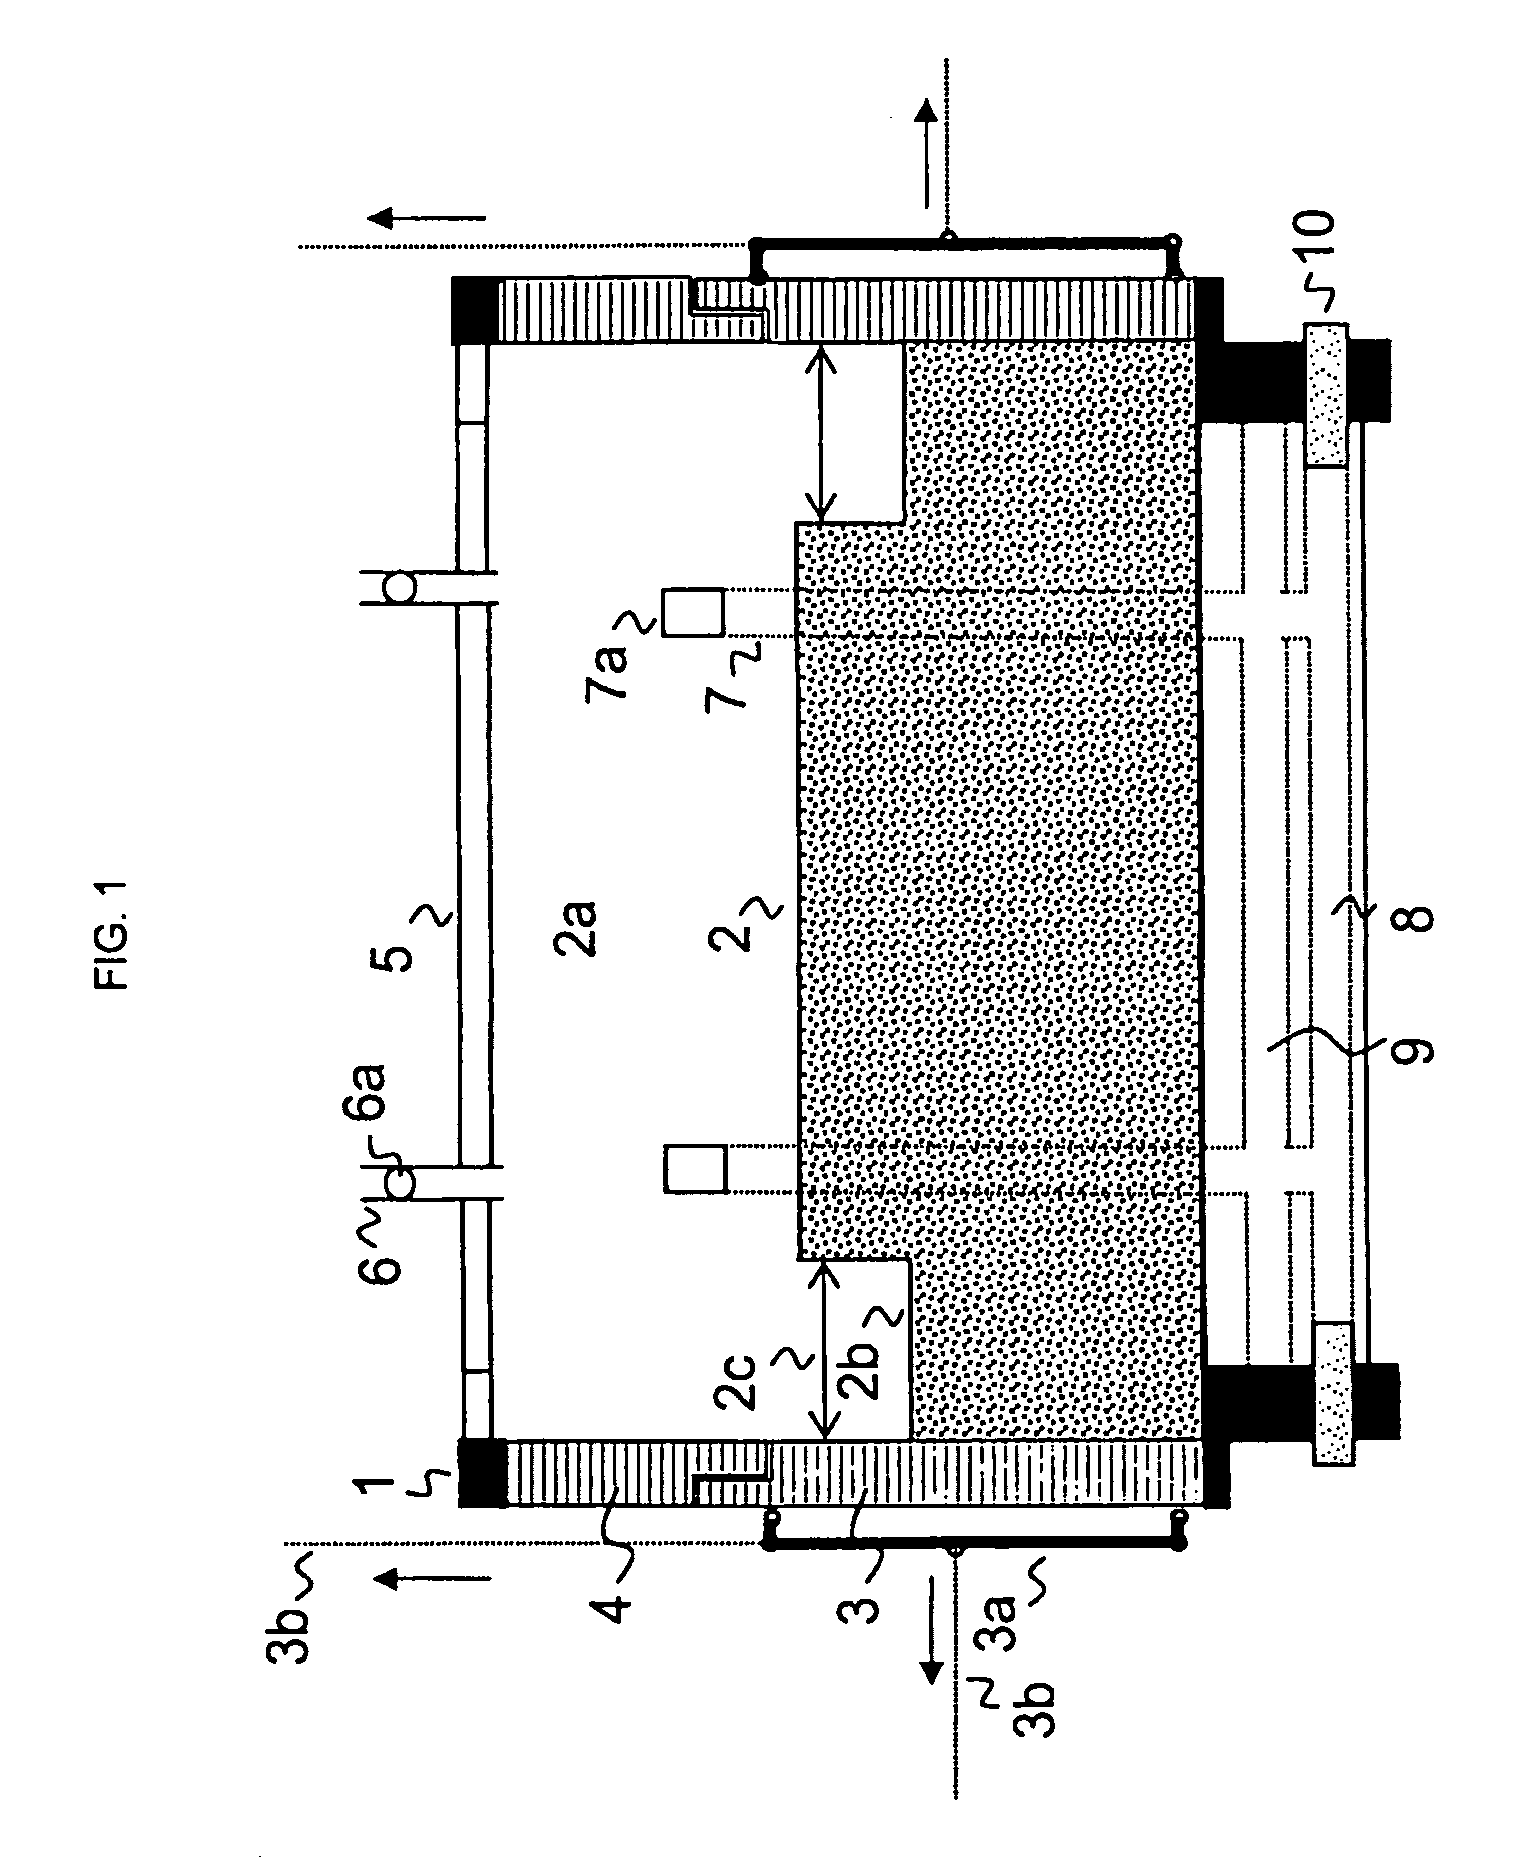 Method to reduce heat radiation losses through coke oven chamber doors and walls by adapting the coal cake in height or density